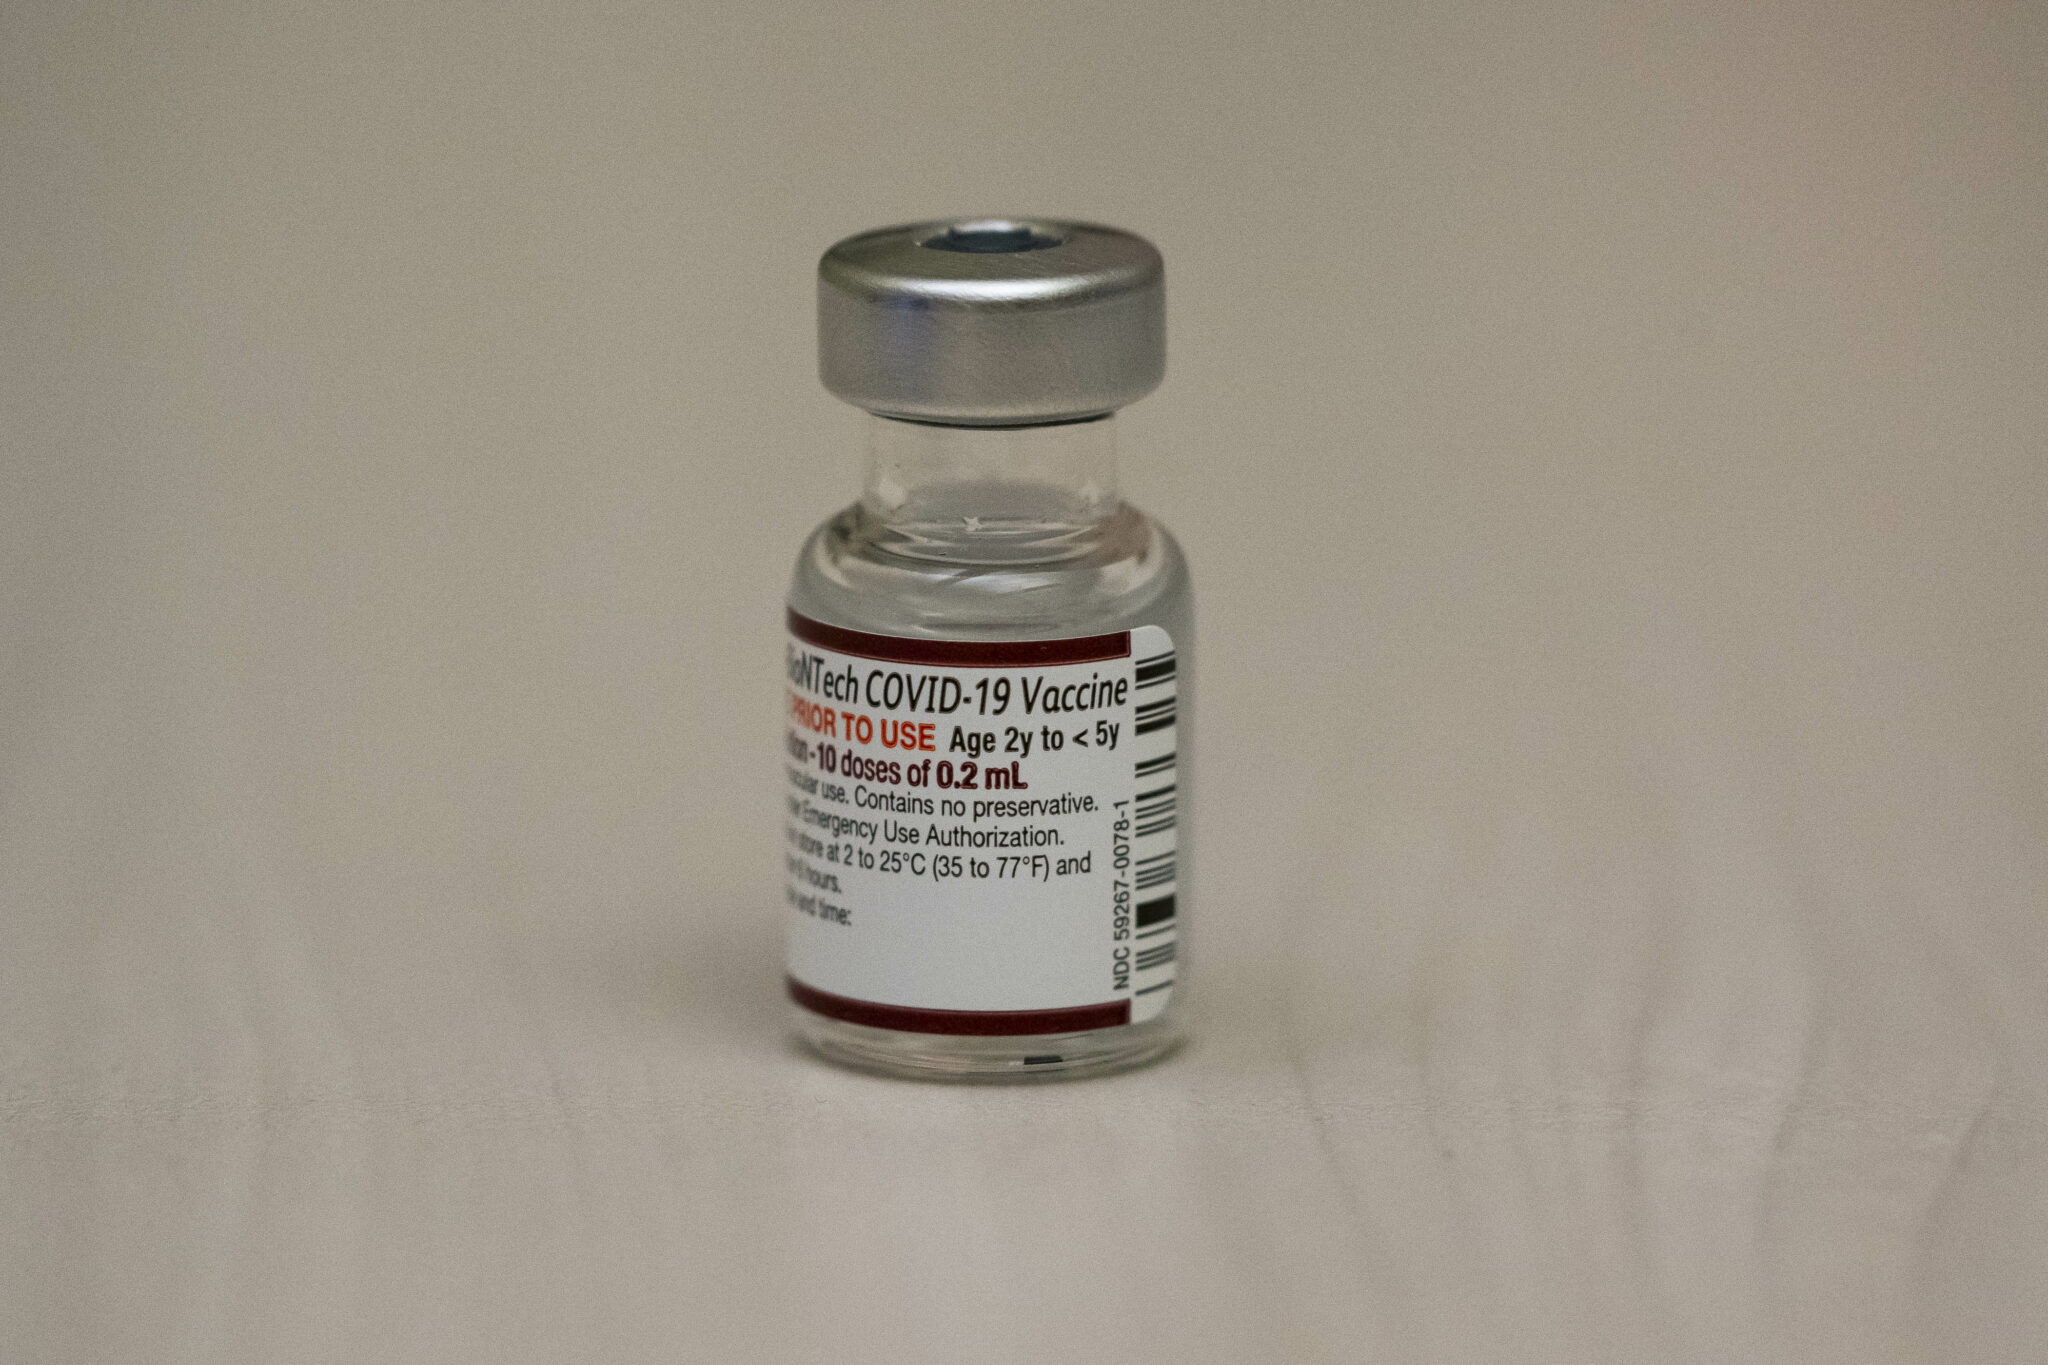 SEATTLE, WA - JUNE 21: A vial of the Pfizer Covid-19 vaccine, labeled for ages 2 to 5 during research but still acceptable for children below age 2, is seen at UW Medical Center - Roosevelt on June 21, 2022 in Seattle, Washington. Covid-19 vaccinations for children younger than 5 began today across the U.S.  (Photo by David Ryder/Getty Images)Washington. Covid-19 vaccinations for children younger than 5 began today across the U.S.  (Photo by David Ryder/Getty Images)